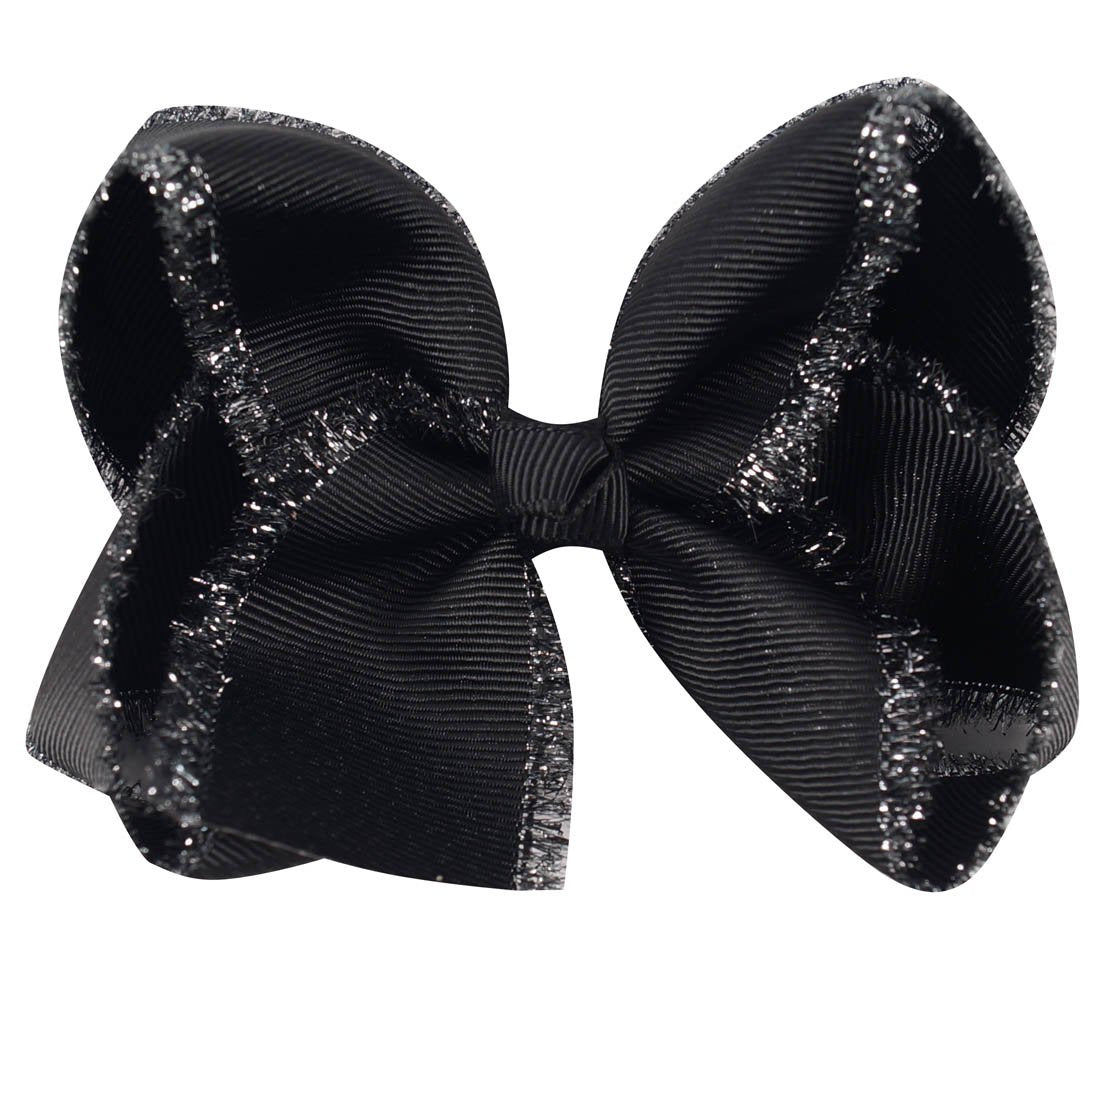 Black/Silver Dotted hairbow keyring - Eurocheer